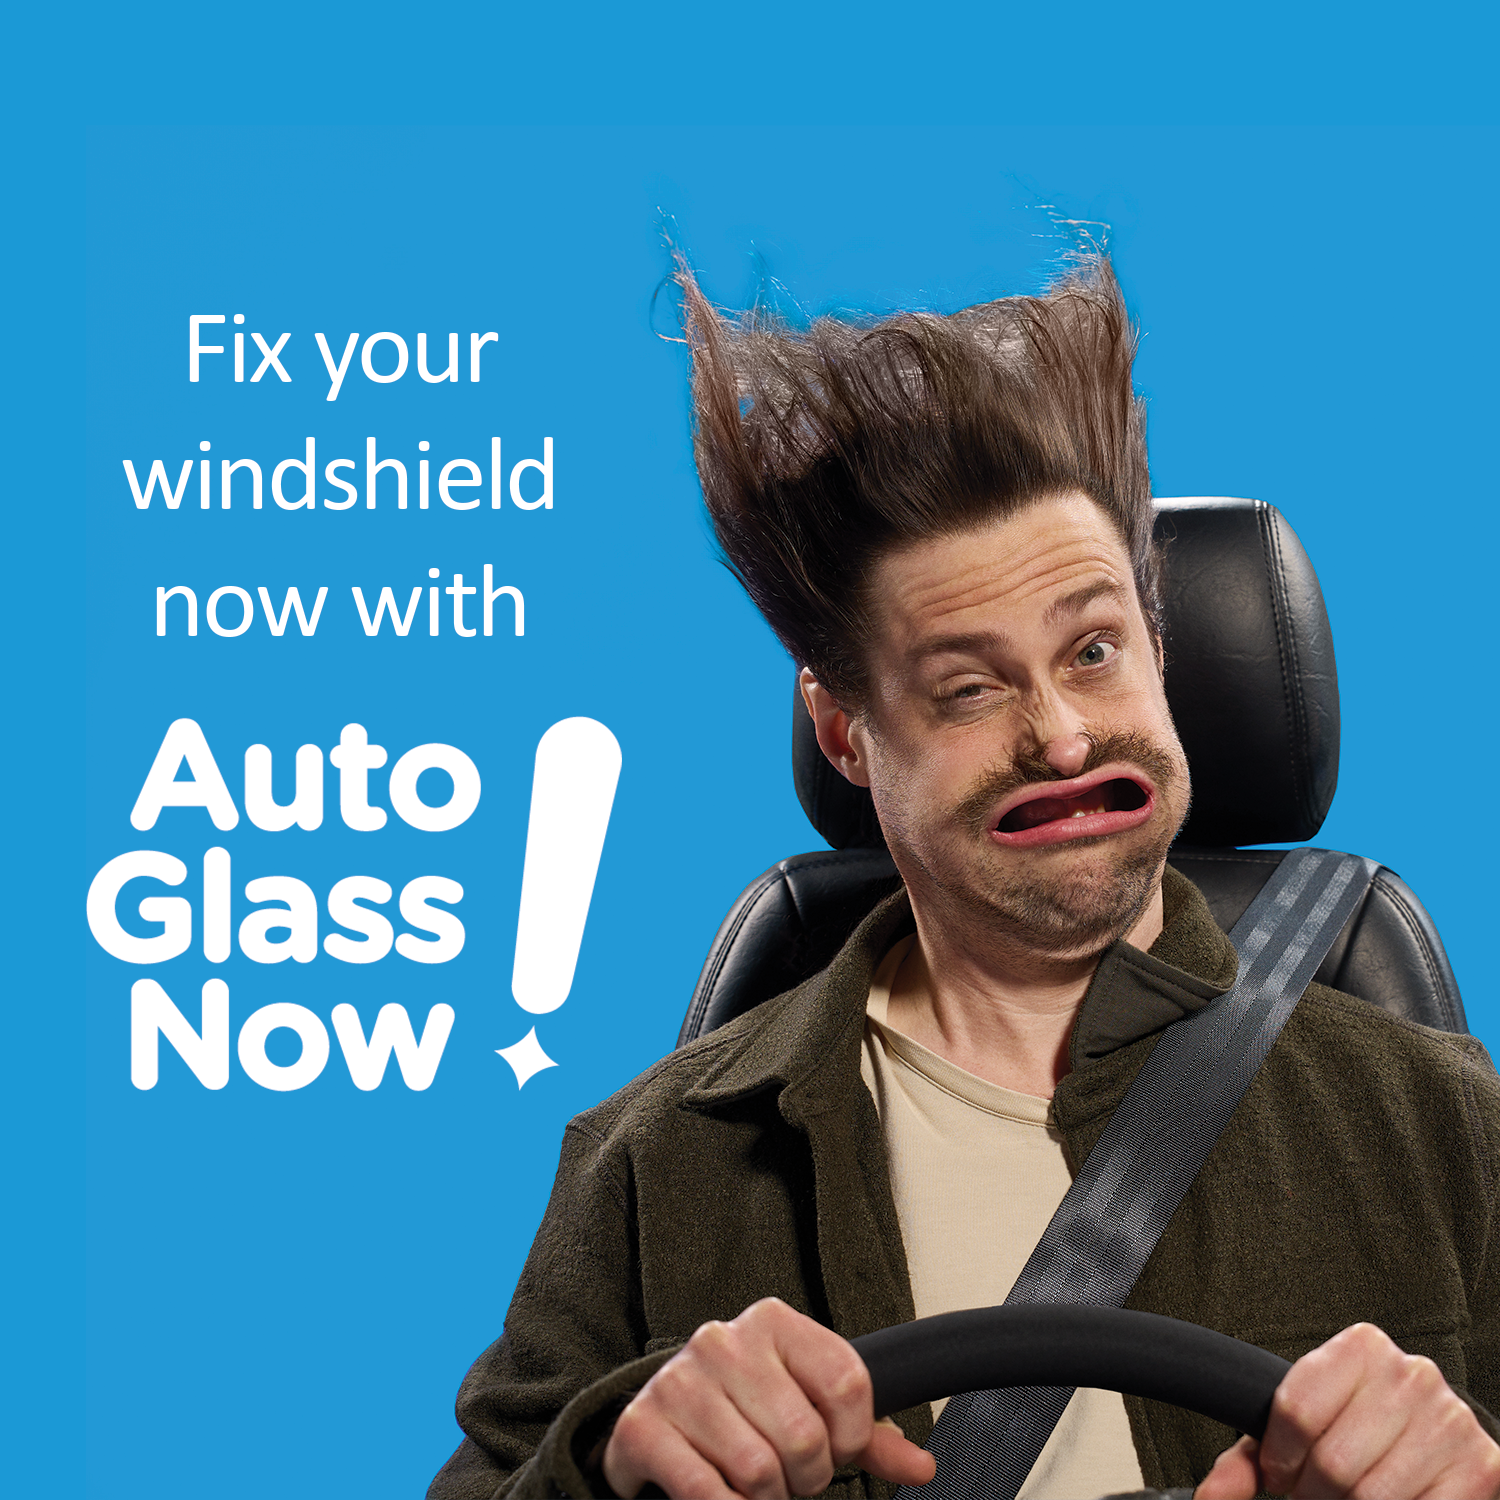 Auto Glass Now gets you